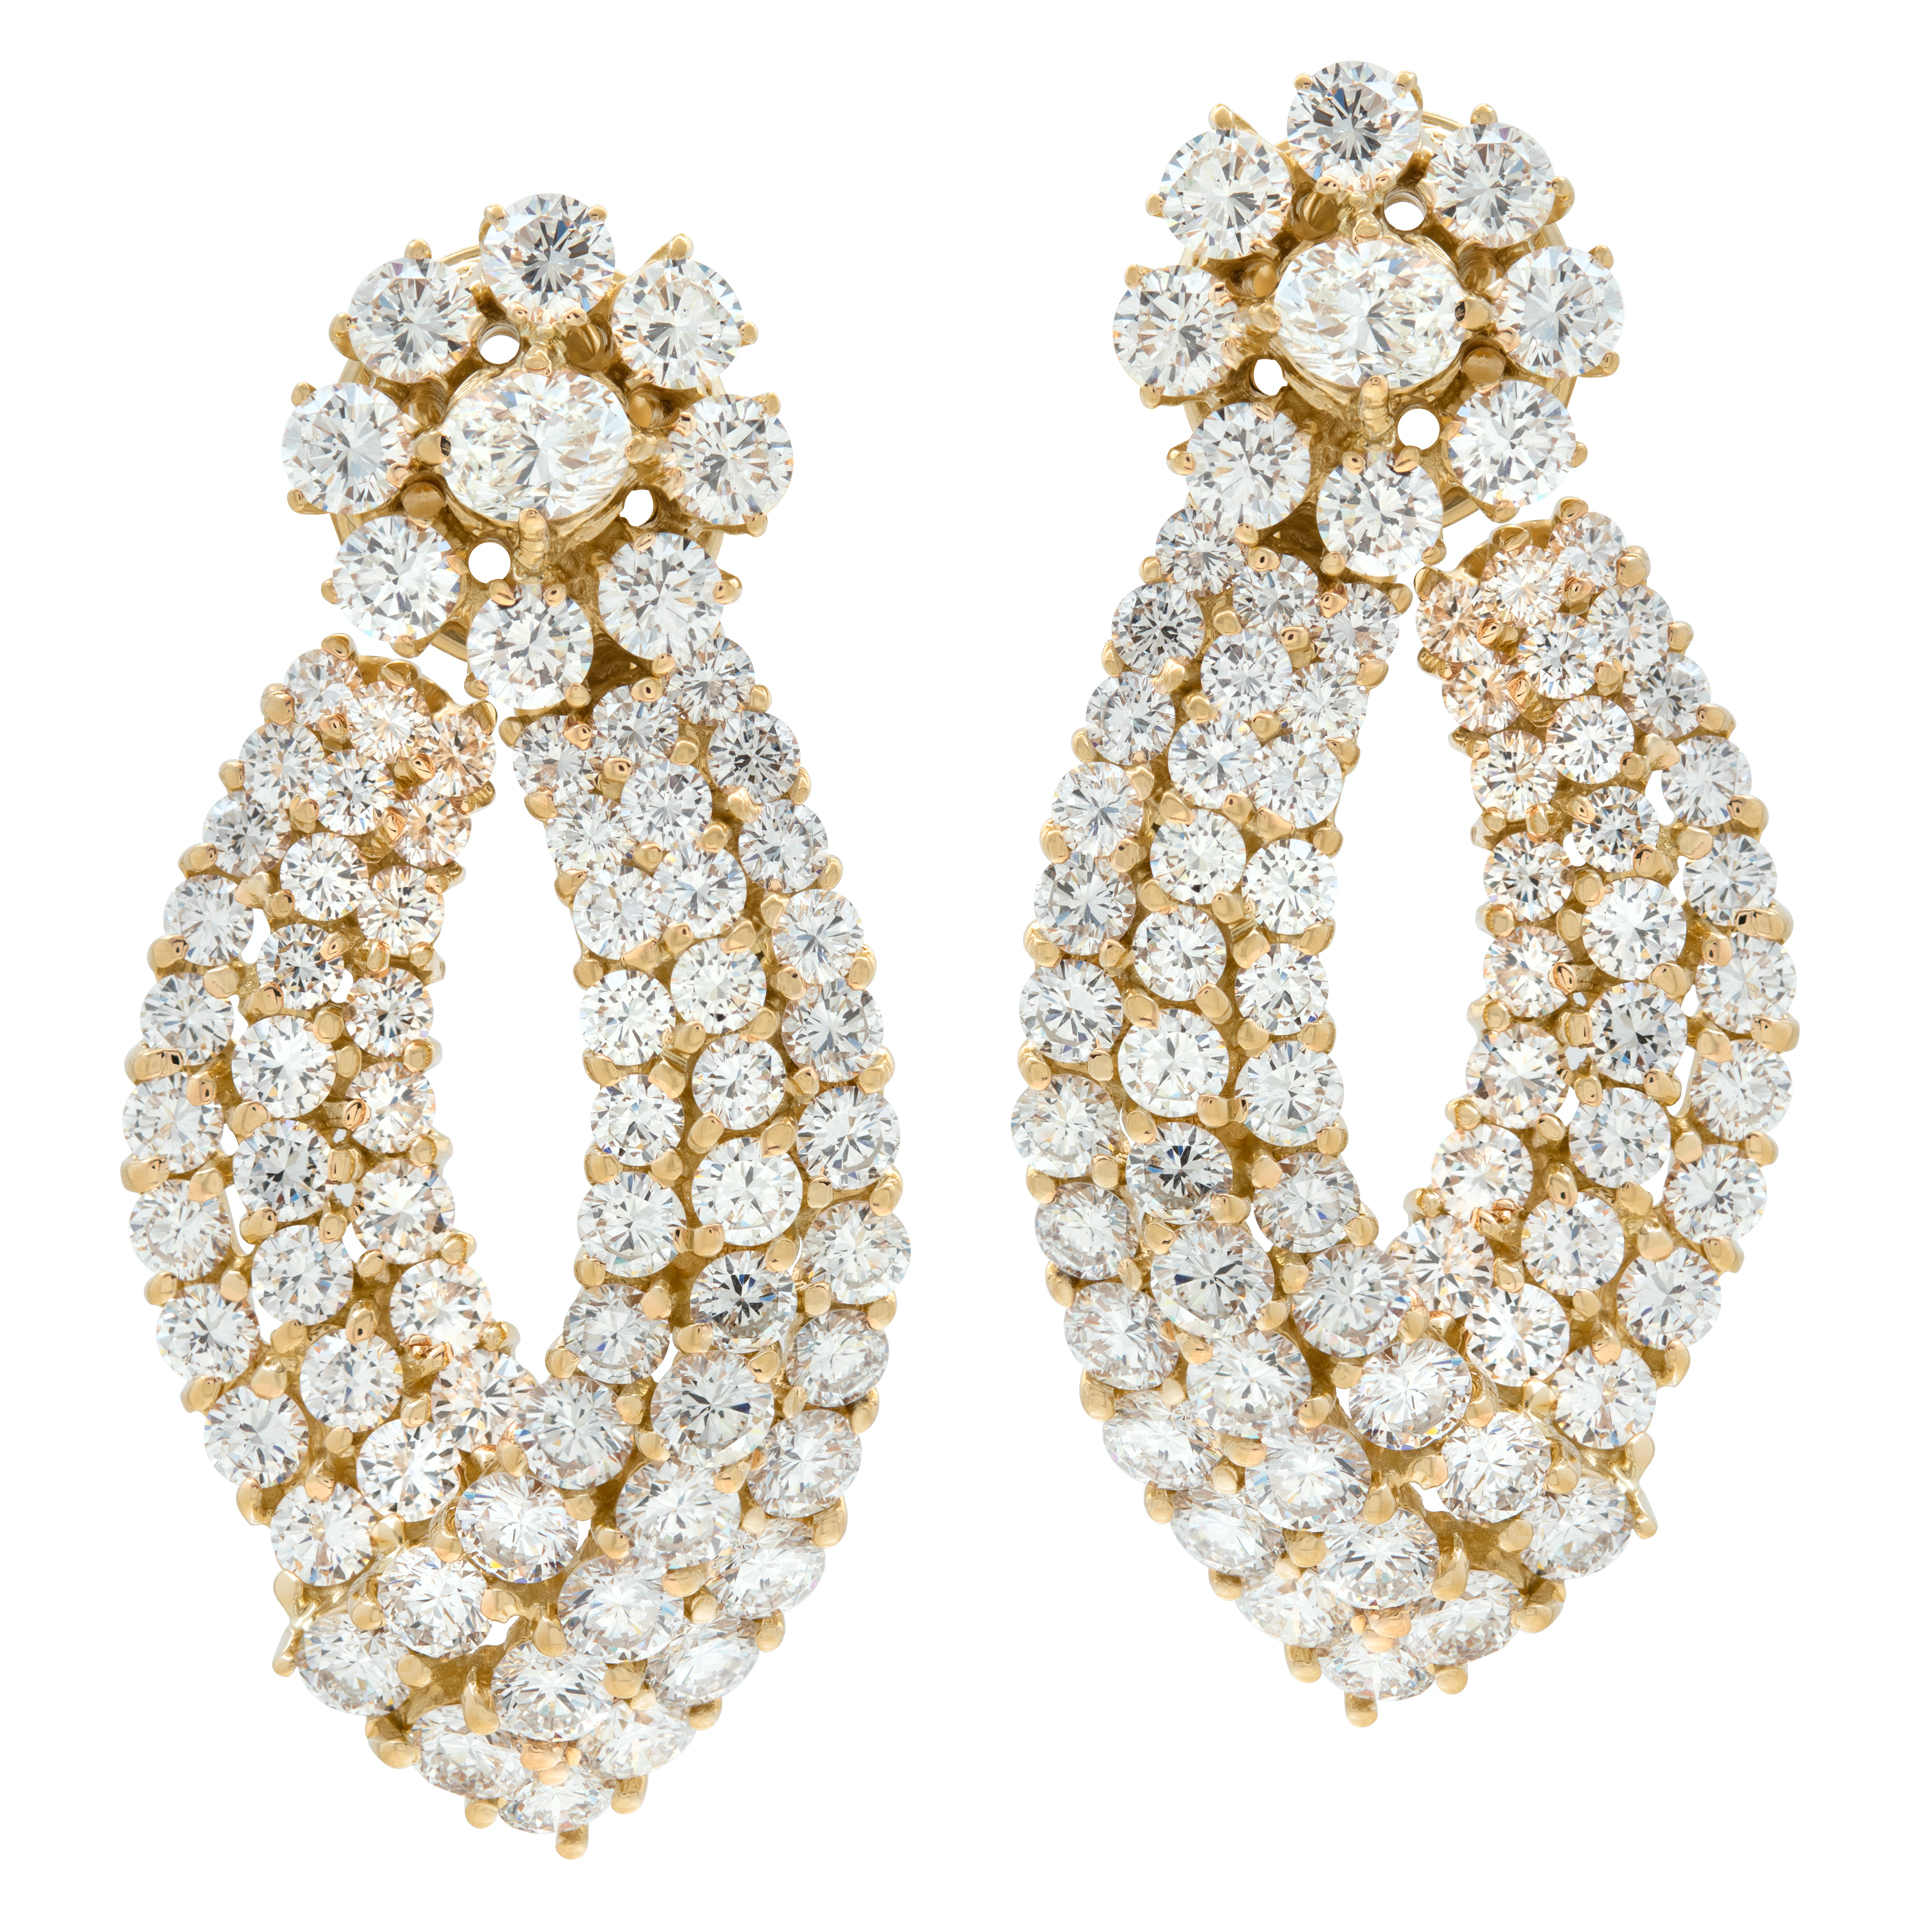 Dangling diamond earrings set in 18K yellow gold with over 15 carats round brilliant cut diamonds.